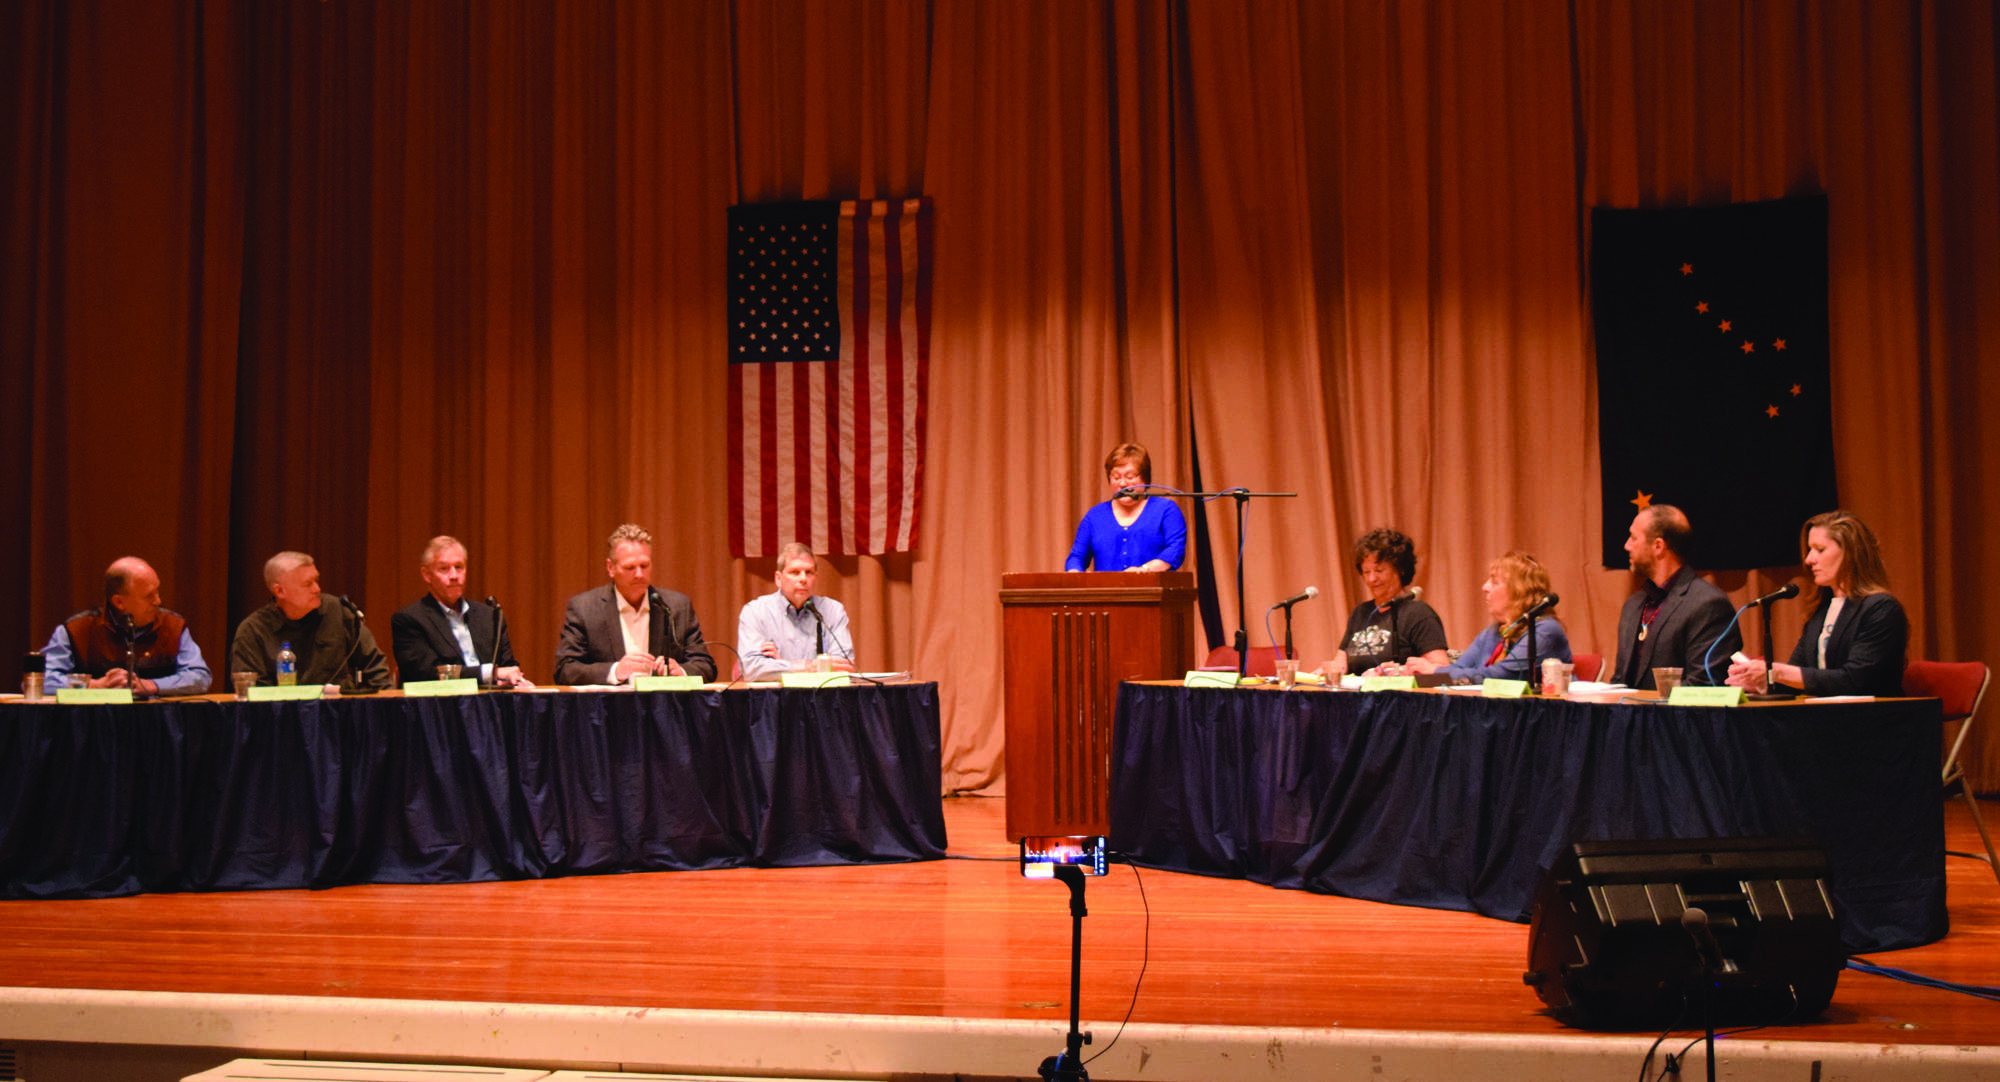 Five candidates running for Alaska governor, at left, squared off in Naknek at the Bristol Bay Fish Expo. From left are Gov. Bill Walker, former Lt. Gov. Mead Treadwell, Anchorage businessman Scott Hawkins, former state Sen. Mike Dunleavy and former Anchorage Mayor and U.S. Sen. Mark Begich. The debate was moderated by KTVA’s Rhonda McBride. (Molly Dischner | Alaska Journal of Commerce)